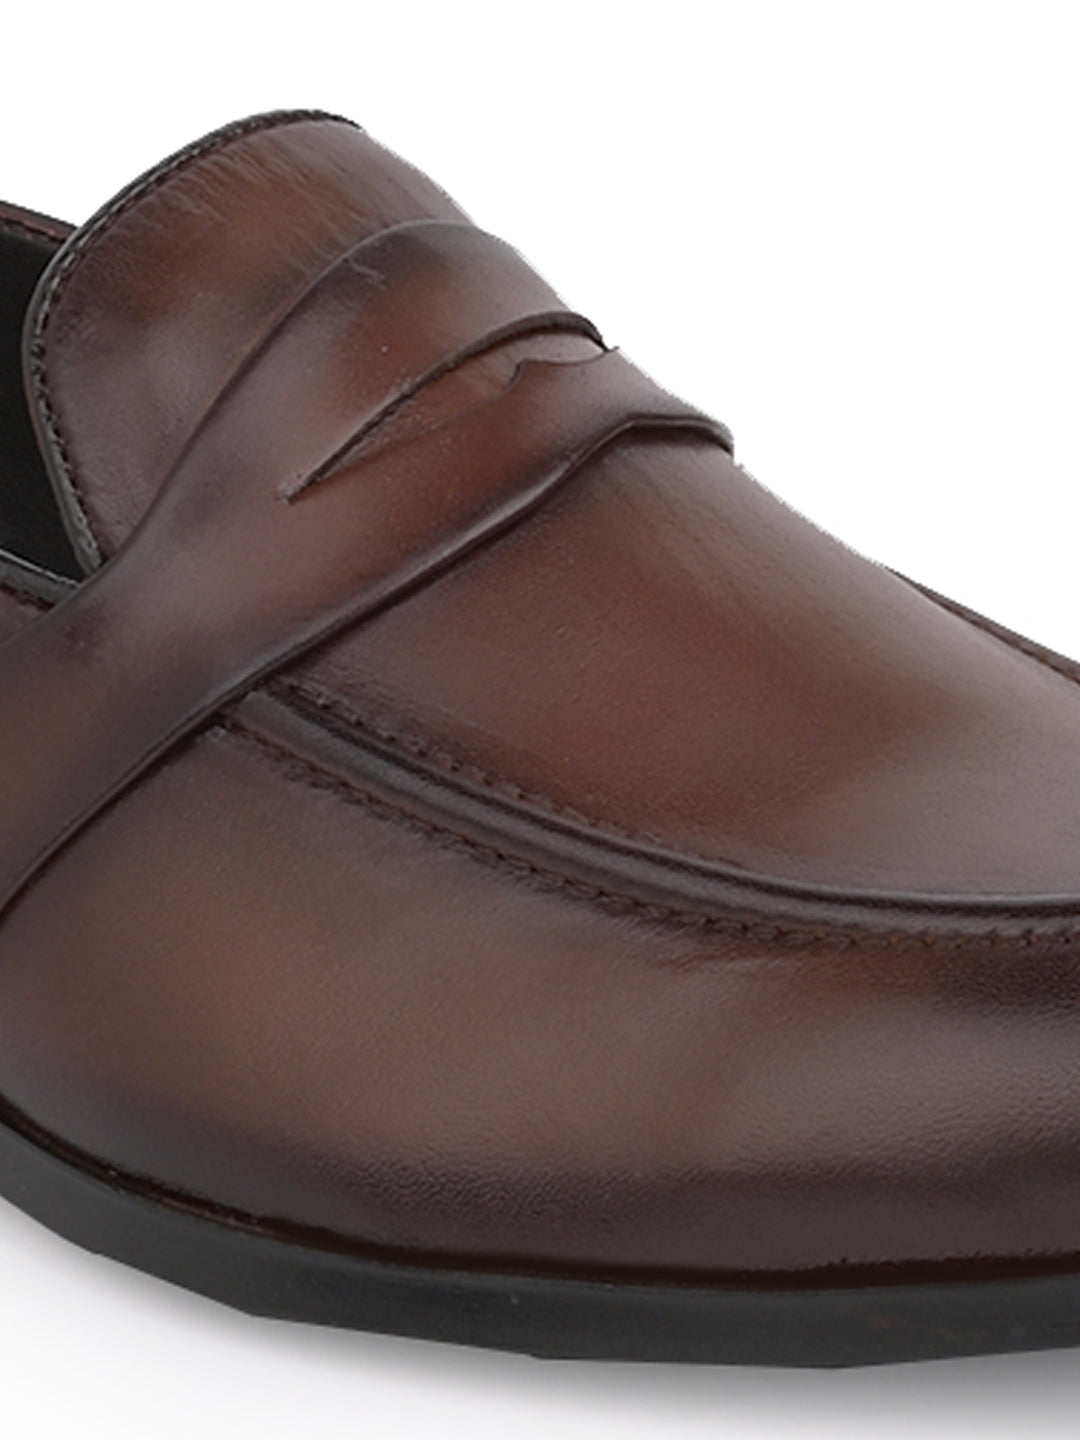 Men Brown Solid Loafers